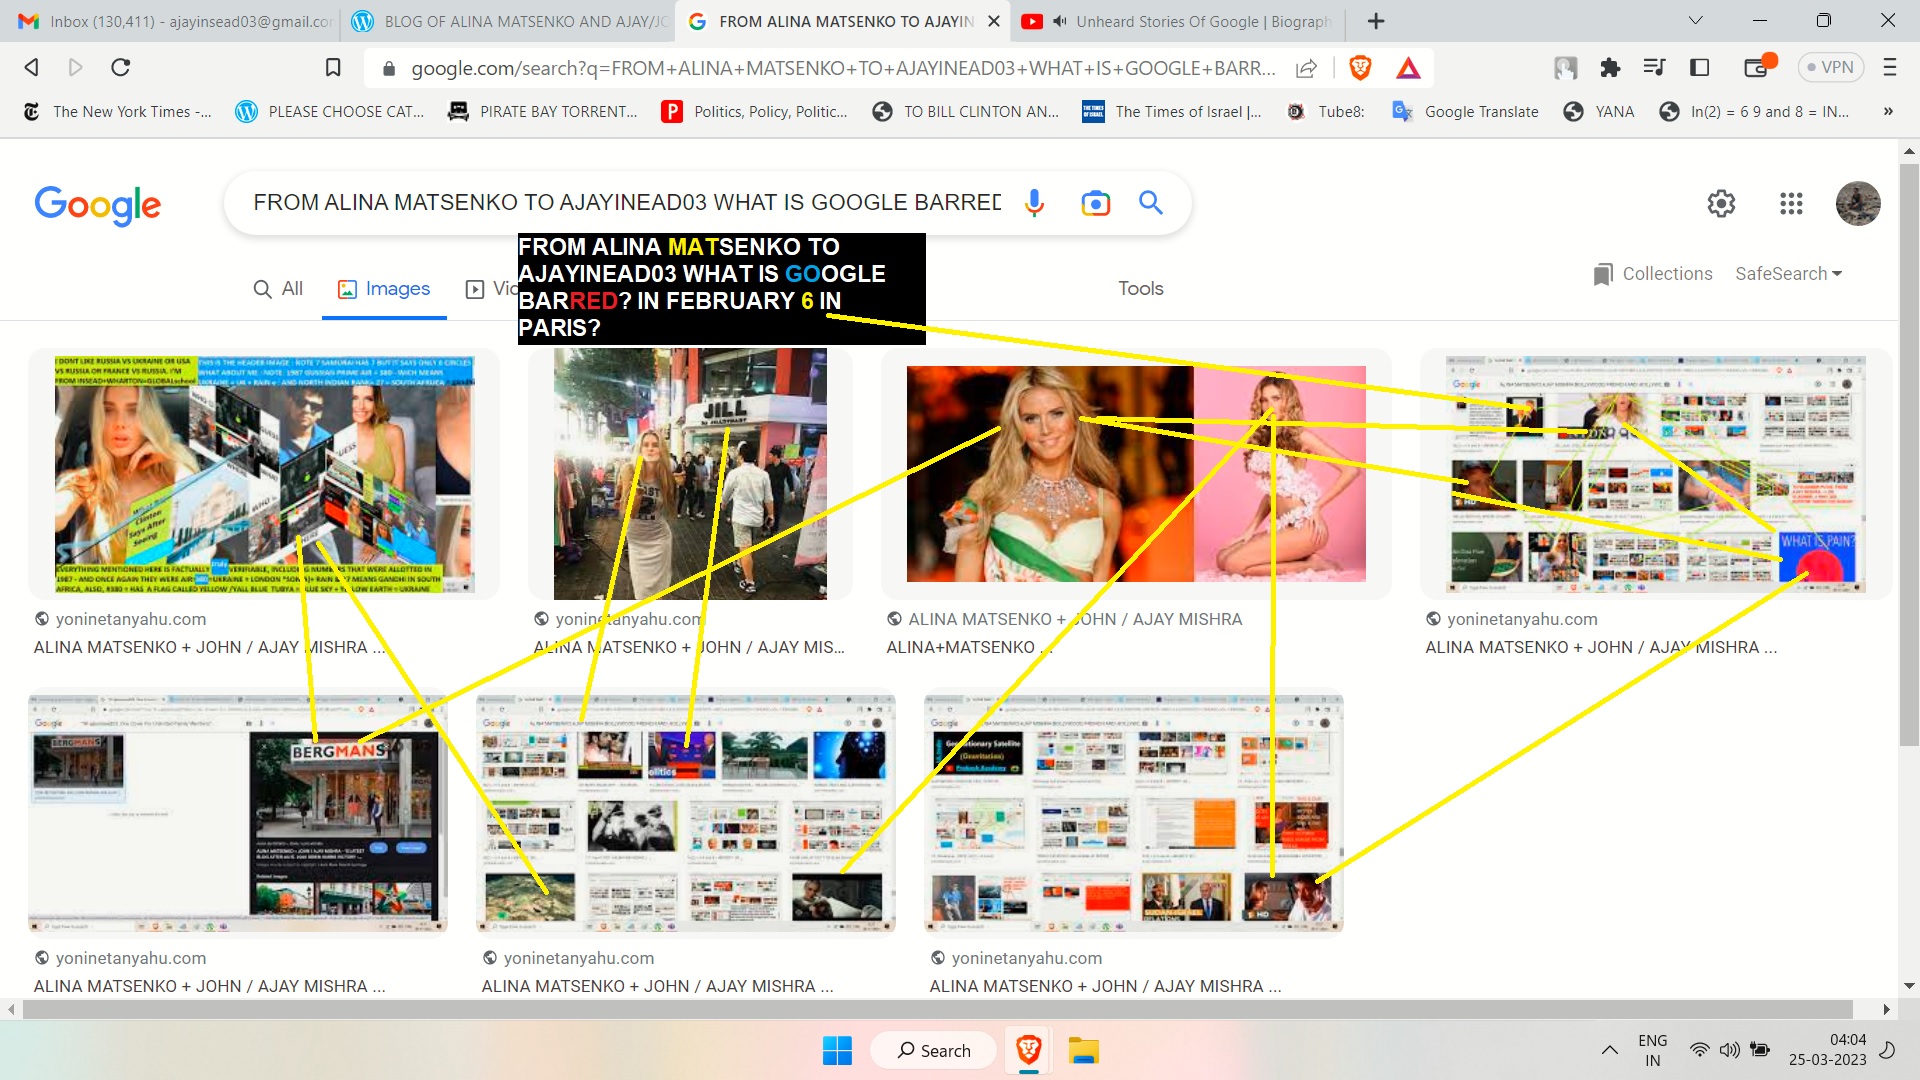 FROM ALINA MATSENKO TO AJAYINEAD03 WHAT IS GOOGLE BARRED IN FEBRUARY 6 IN PARIS MISSION VISION STORY AND COMMUNICATION